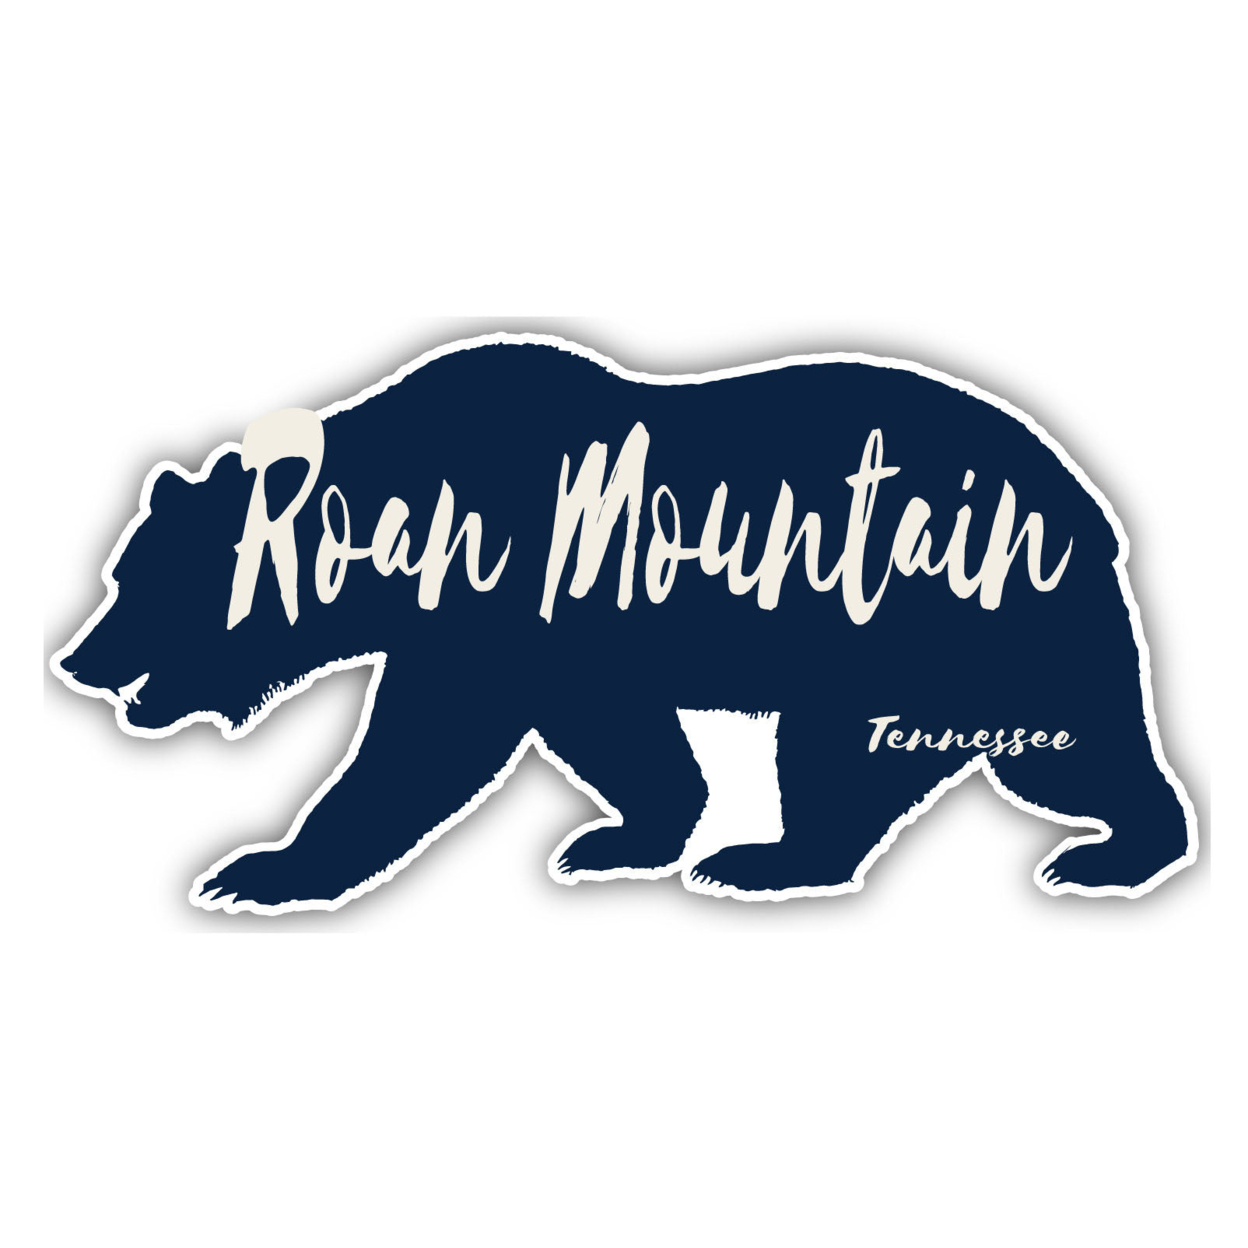 Roan Mountain Tennessee Souvenir Decorative Stickers (Choose Theme And Size) - Single Unit, 2-Inch, Tent